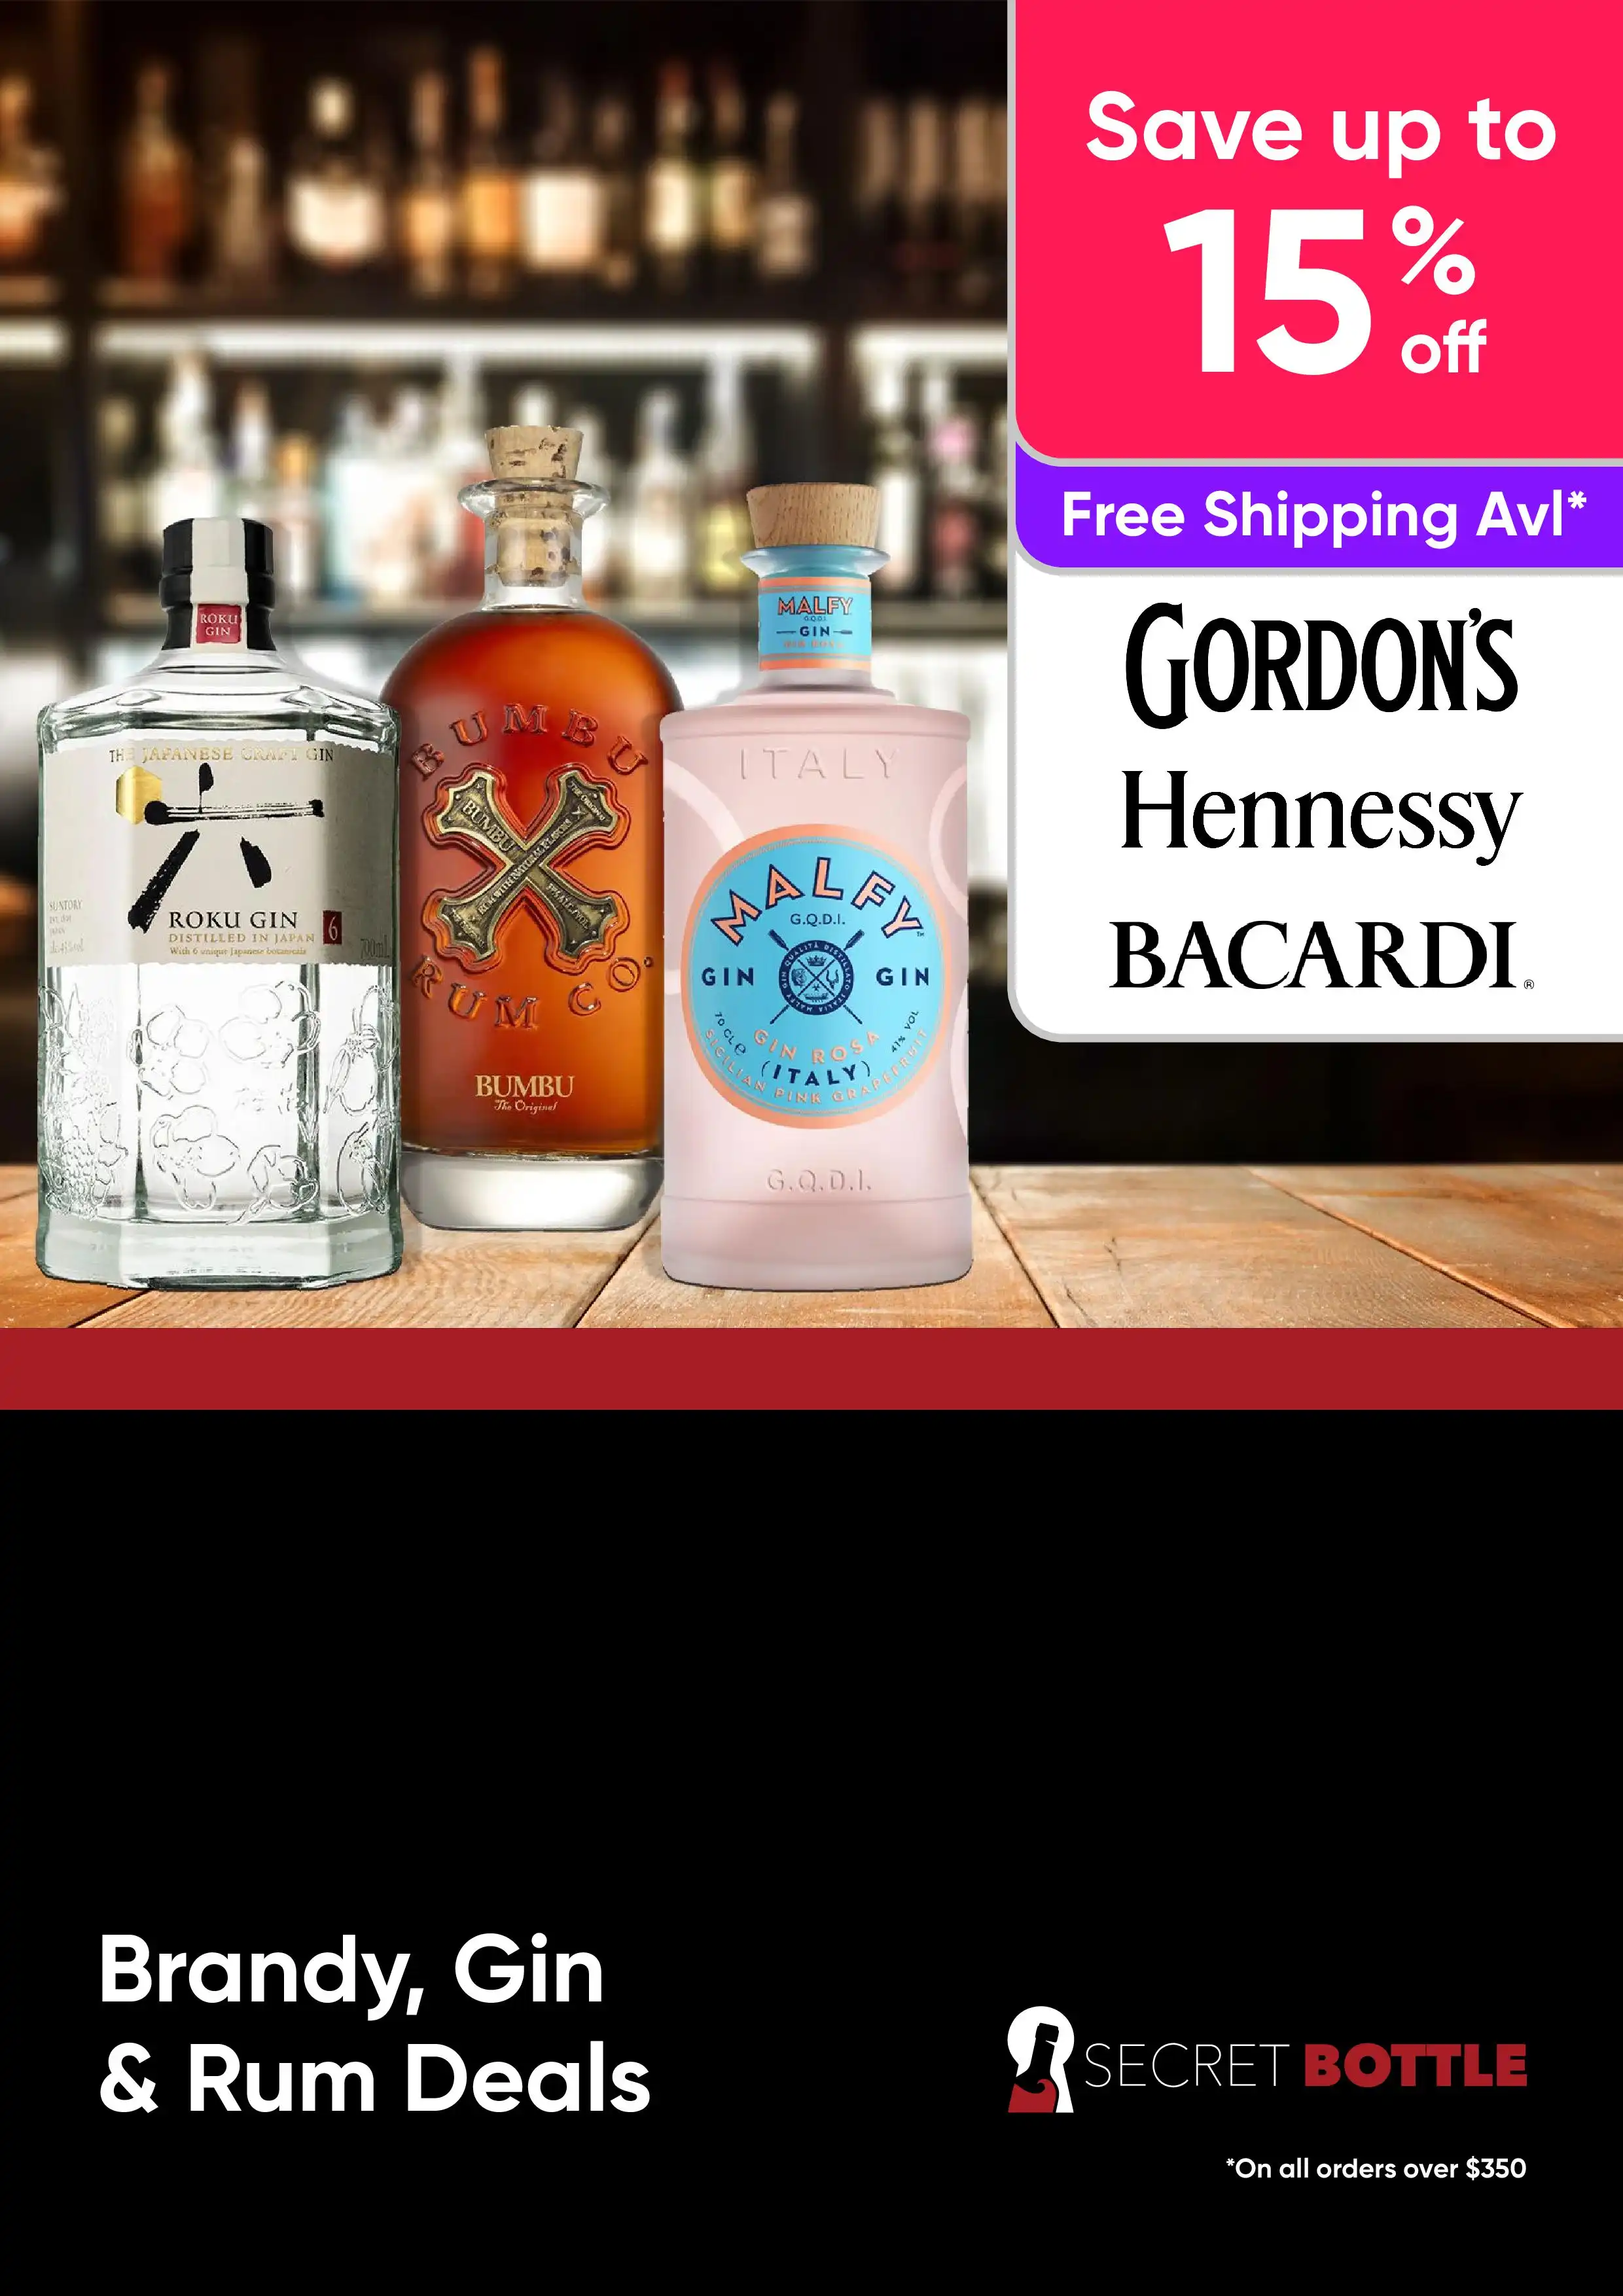 Save on Favourite Brandy, Gin and Rum Spirits - Save Up to 15% On Gordon's and More